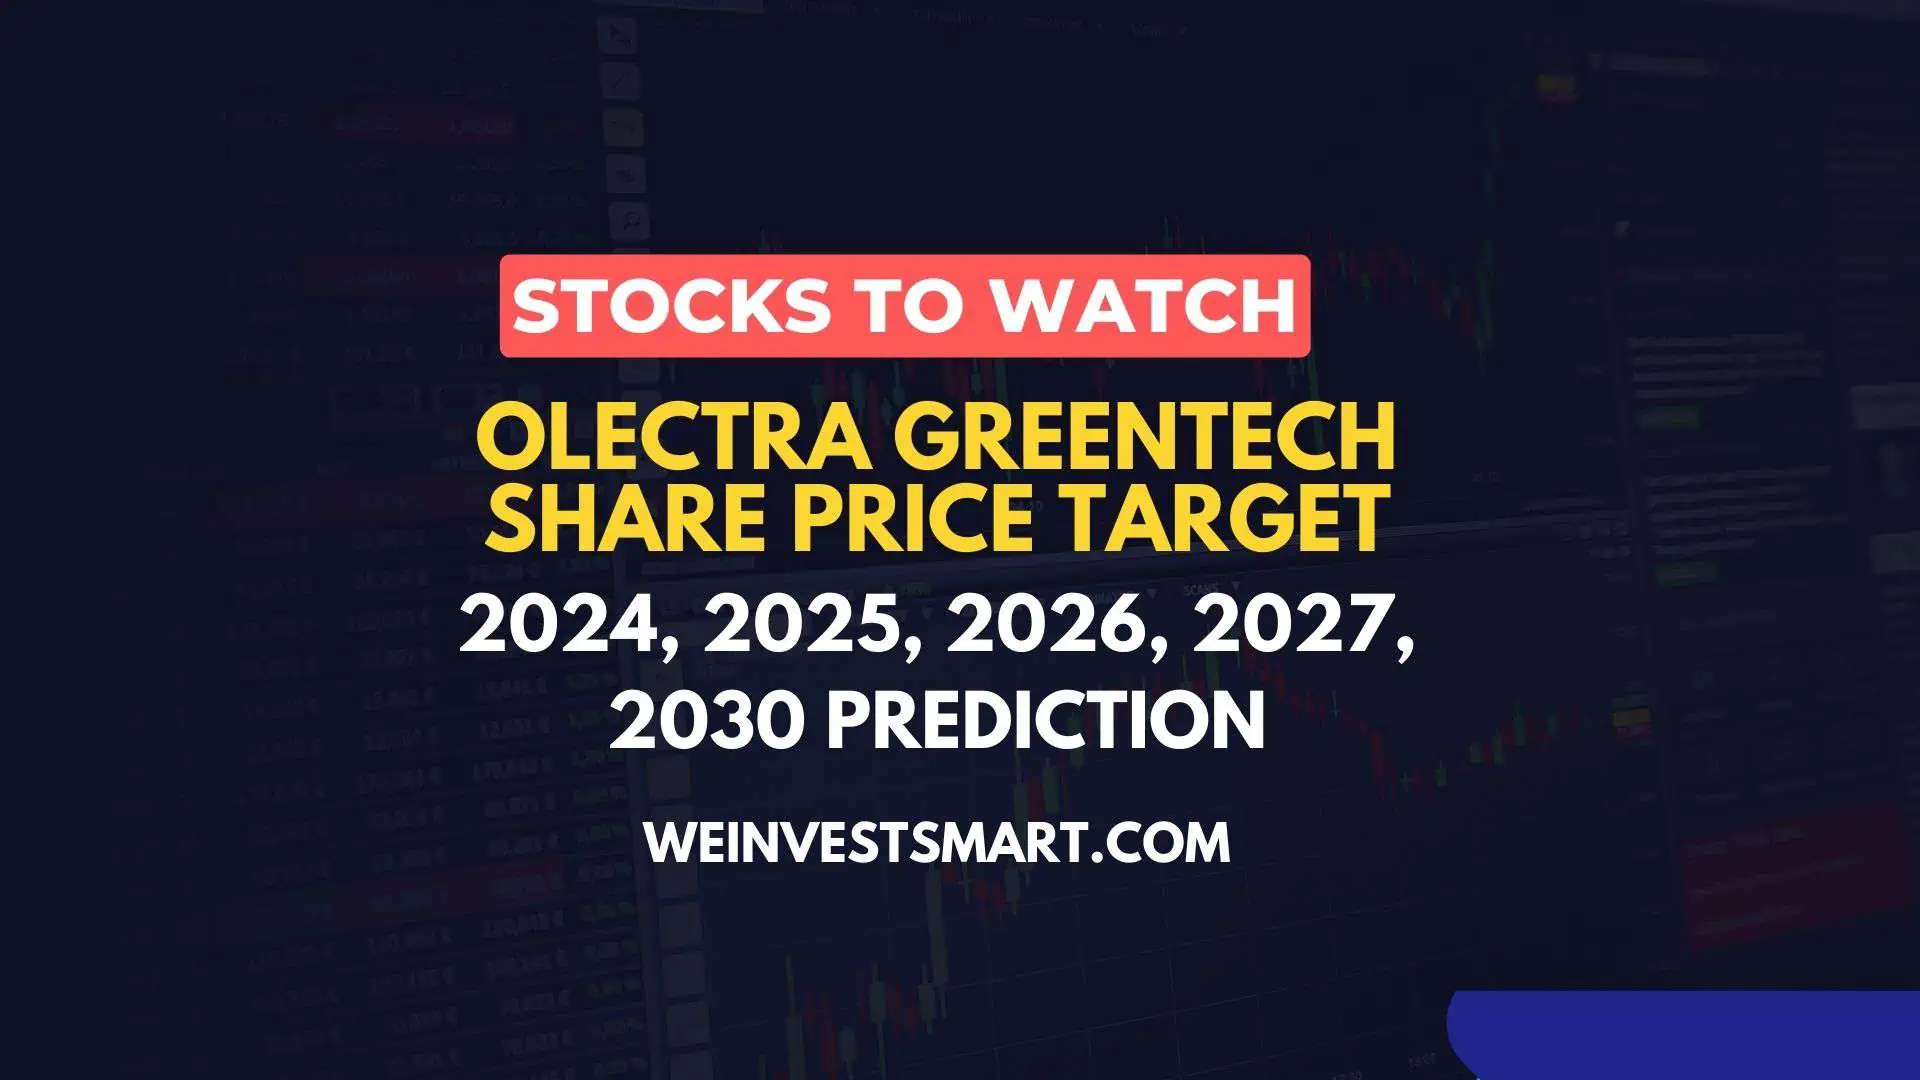 Olectra Greentech share price target 2024, 2025, 2026, 2027, 2030